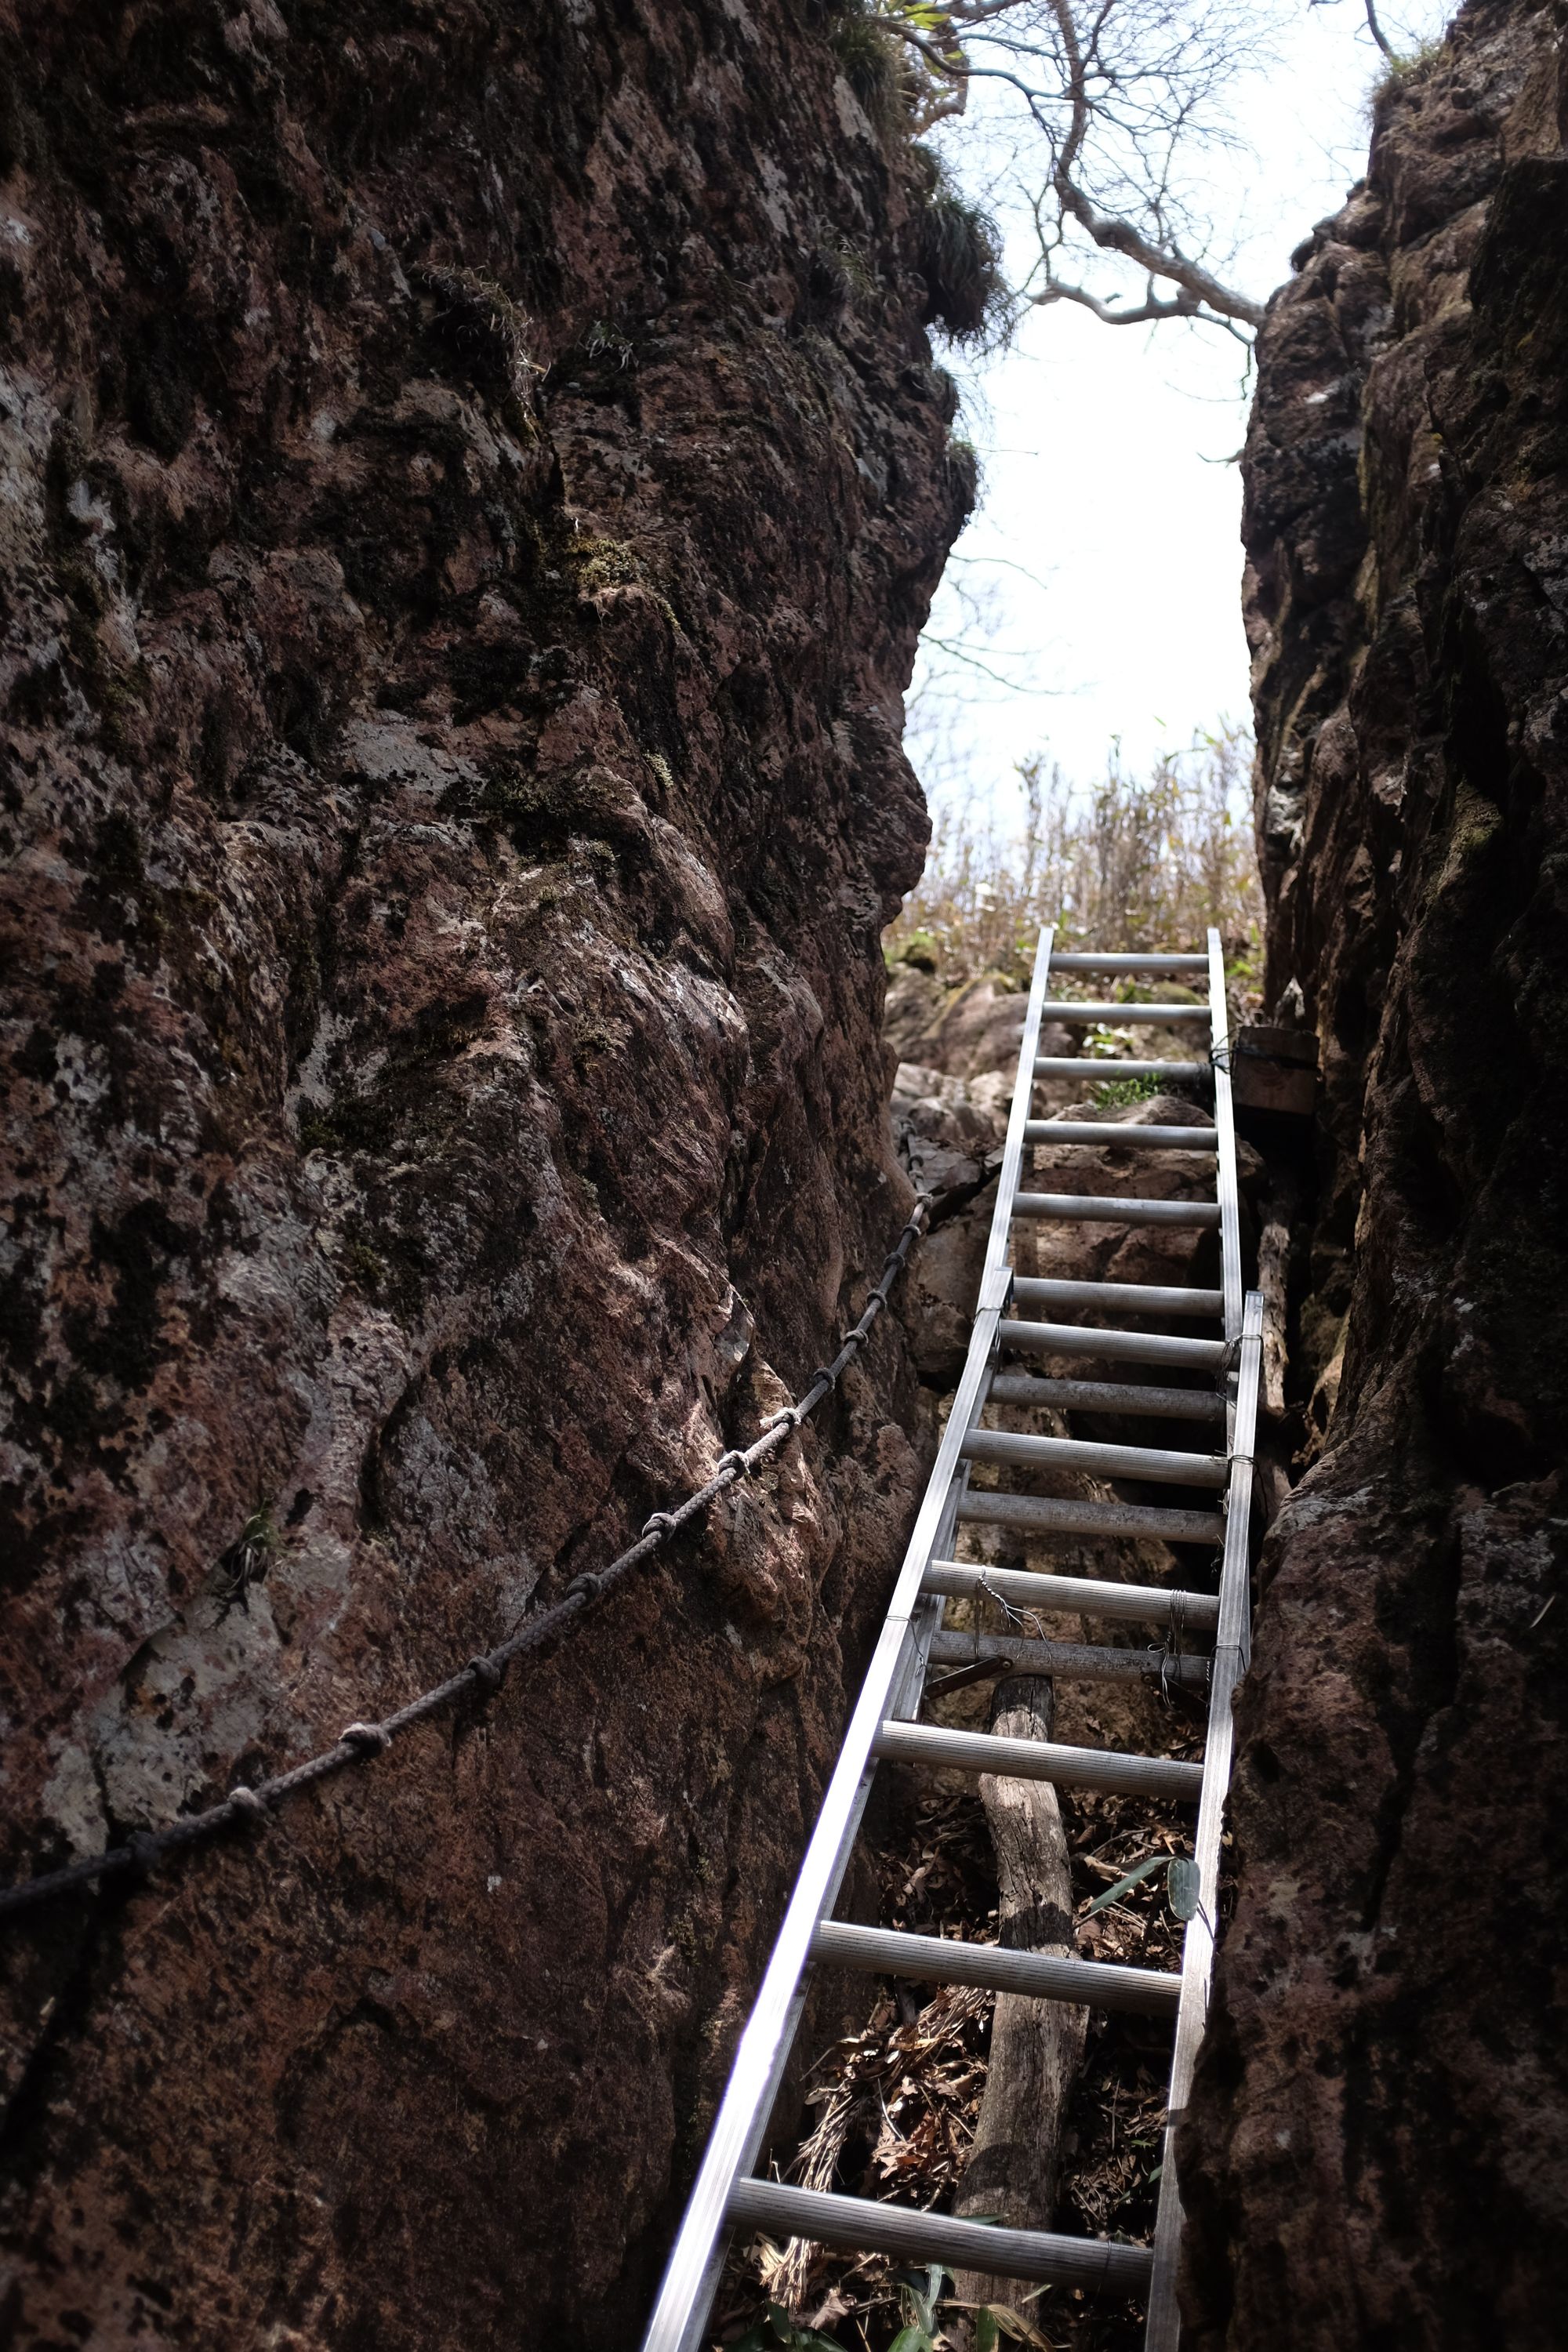 A ladder leads up in a cleft between two rocks.